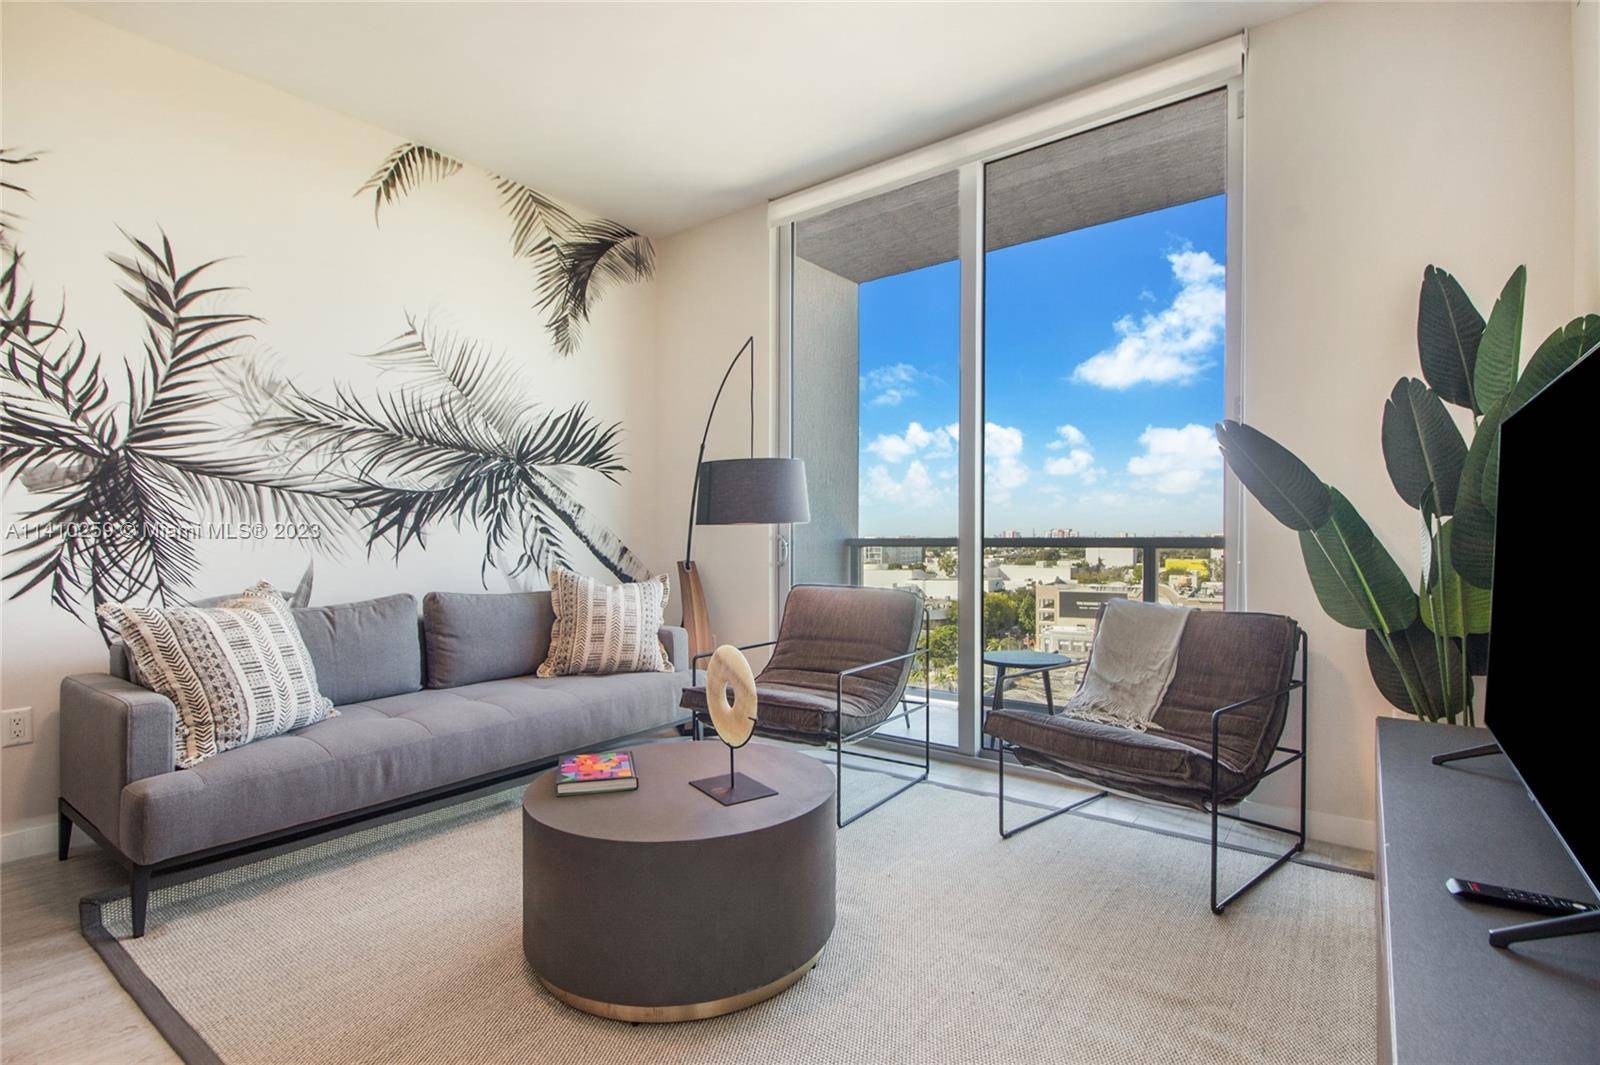 AMAZING OPPORTUNITY BEAUTIFUL 1 BED CONDO IN ONE OF THE NEWEST CONDO BUILDINGS IN THE MIAMI DESIGN DISTRICT, ONLY 15 MIN AWAY FROM AIRPORT AND BEACH.